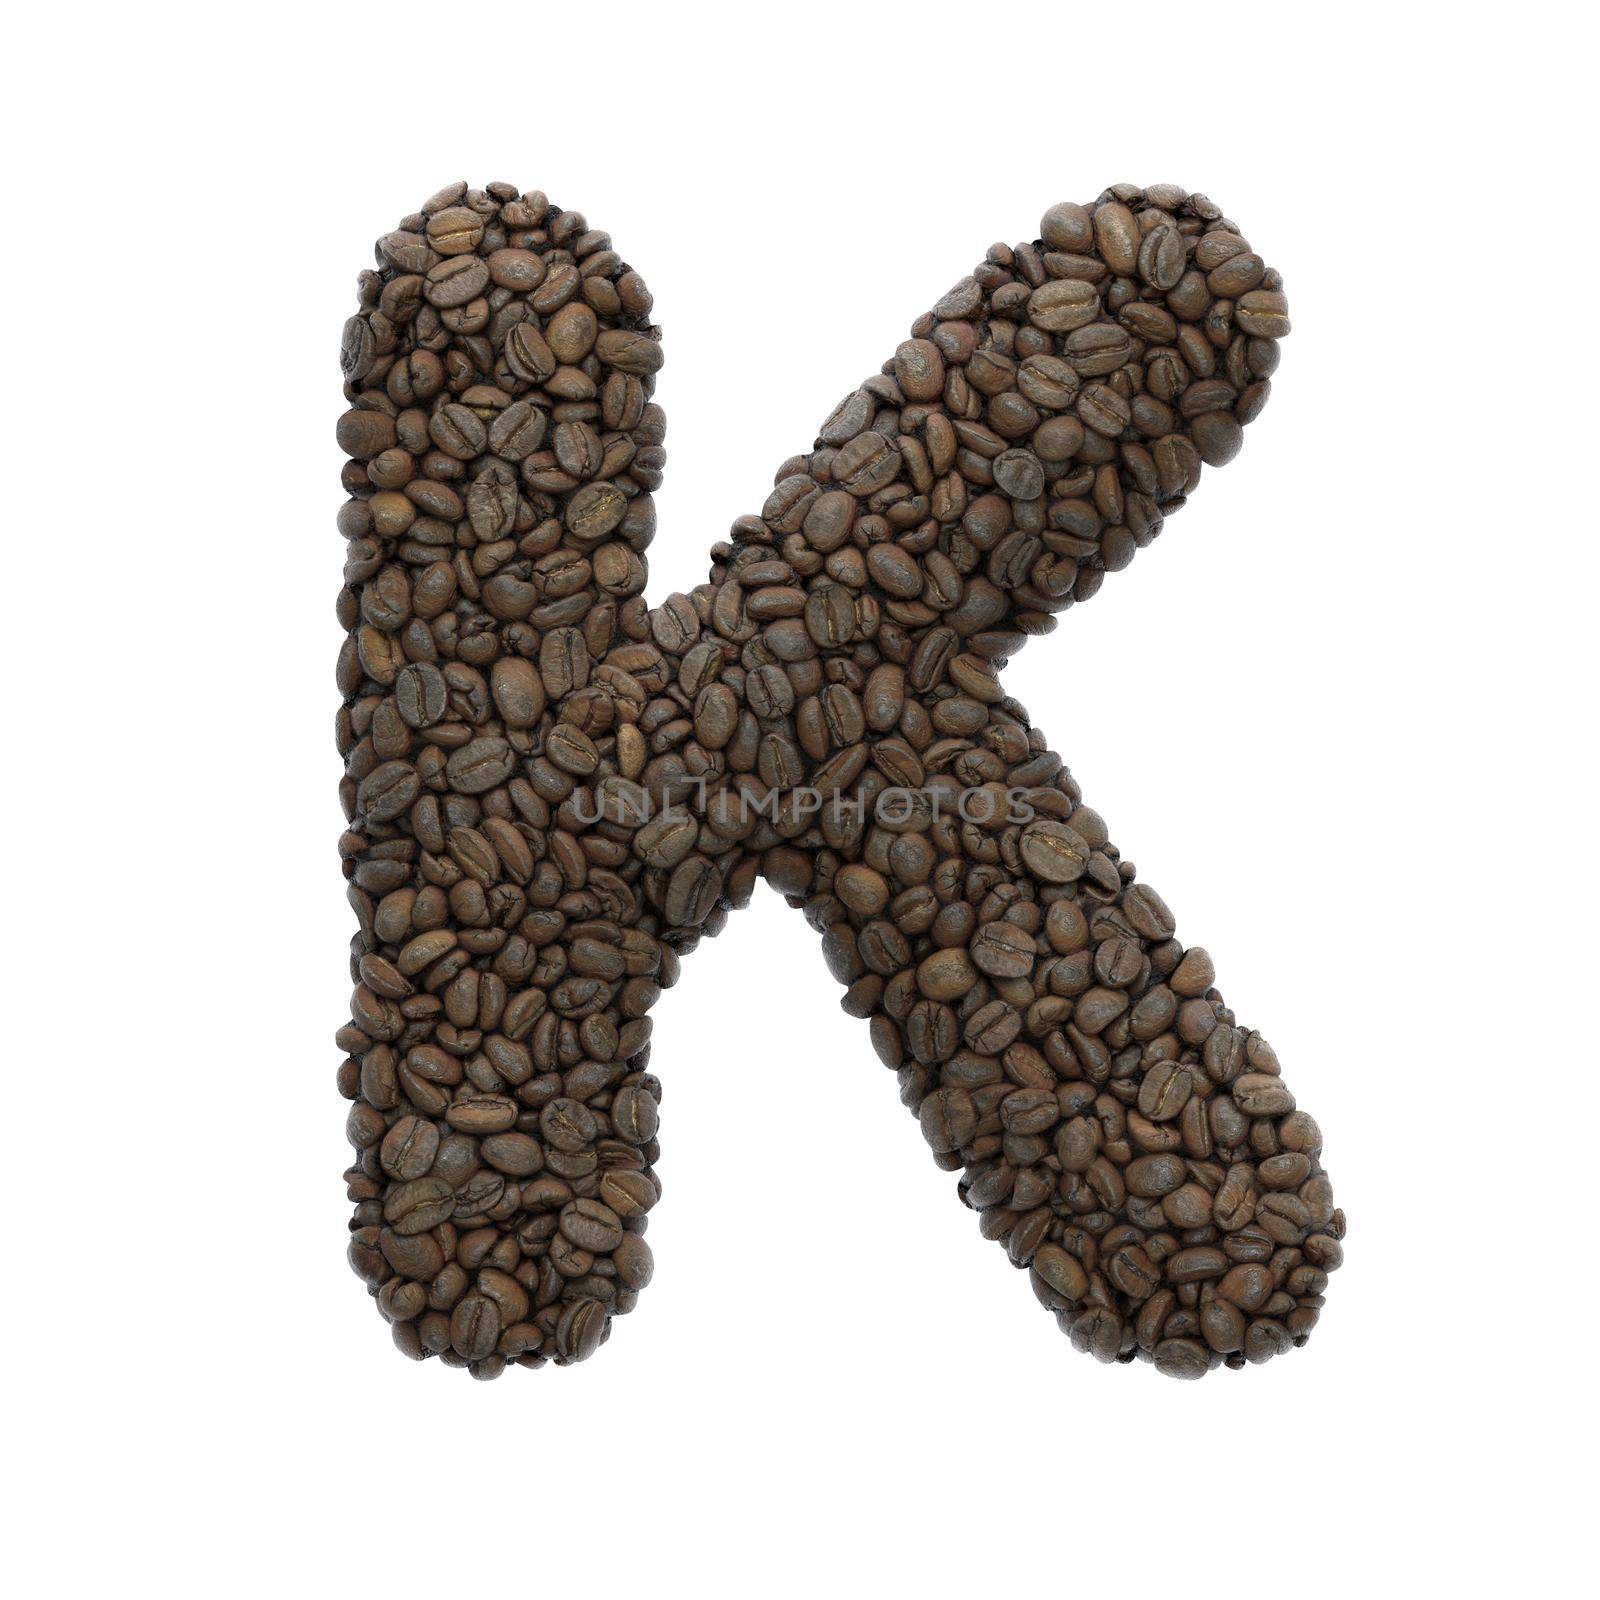 Coffee letter K - Capital 3d roasted beans font - suitable for Coffee, energy or insomnia related subjects by chrisroll